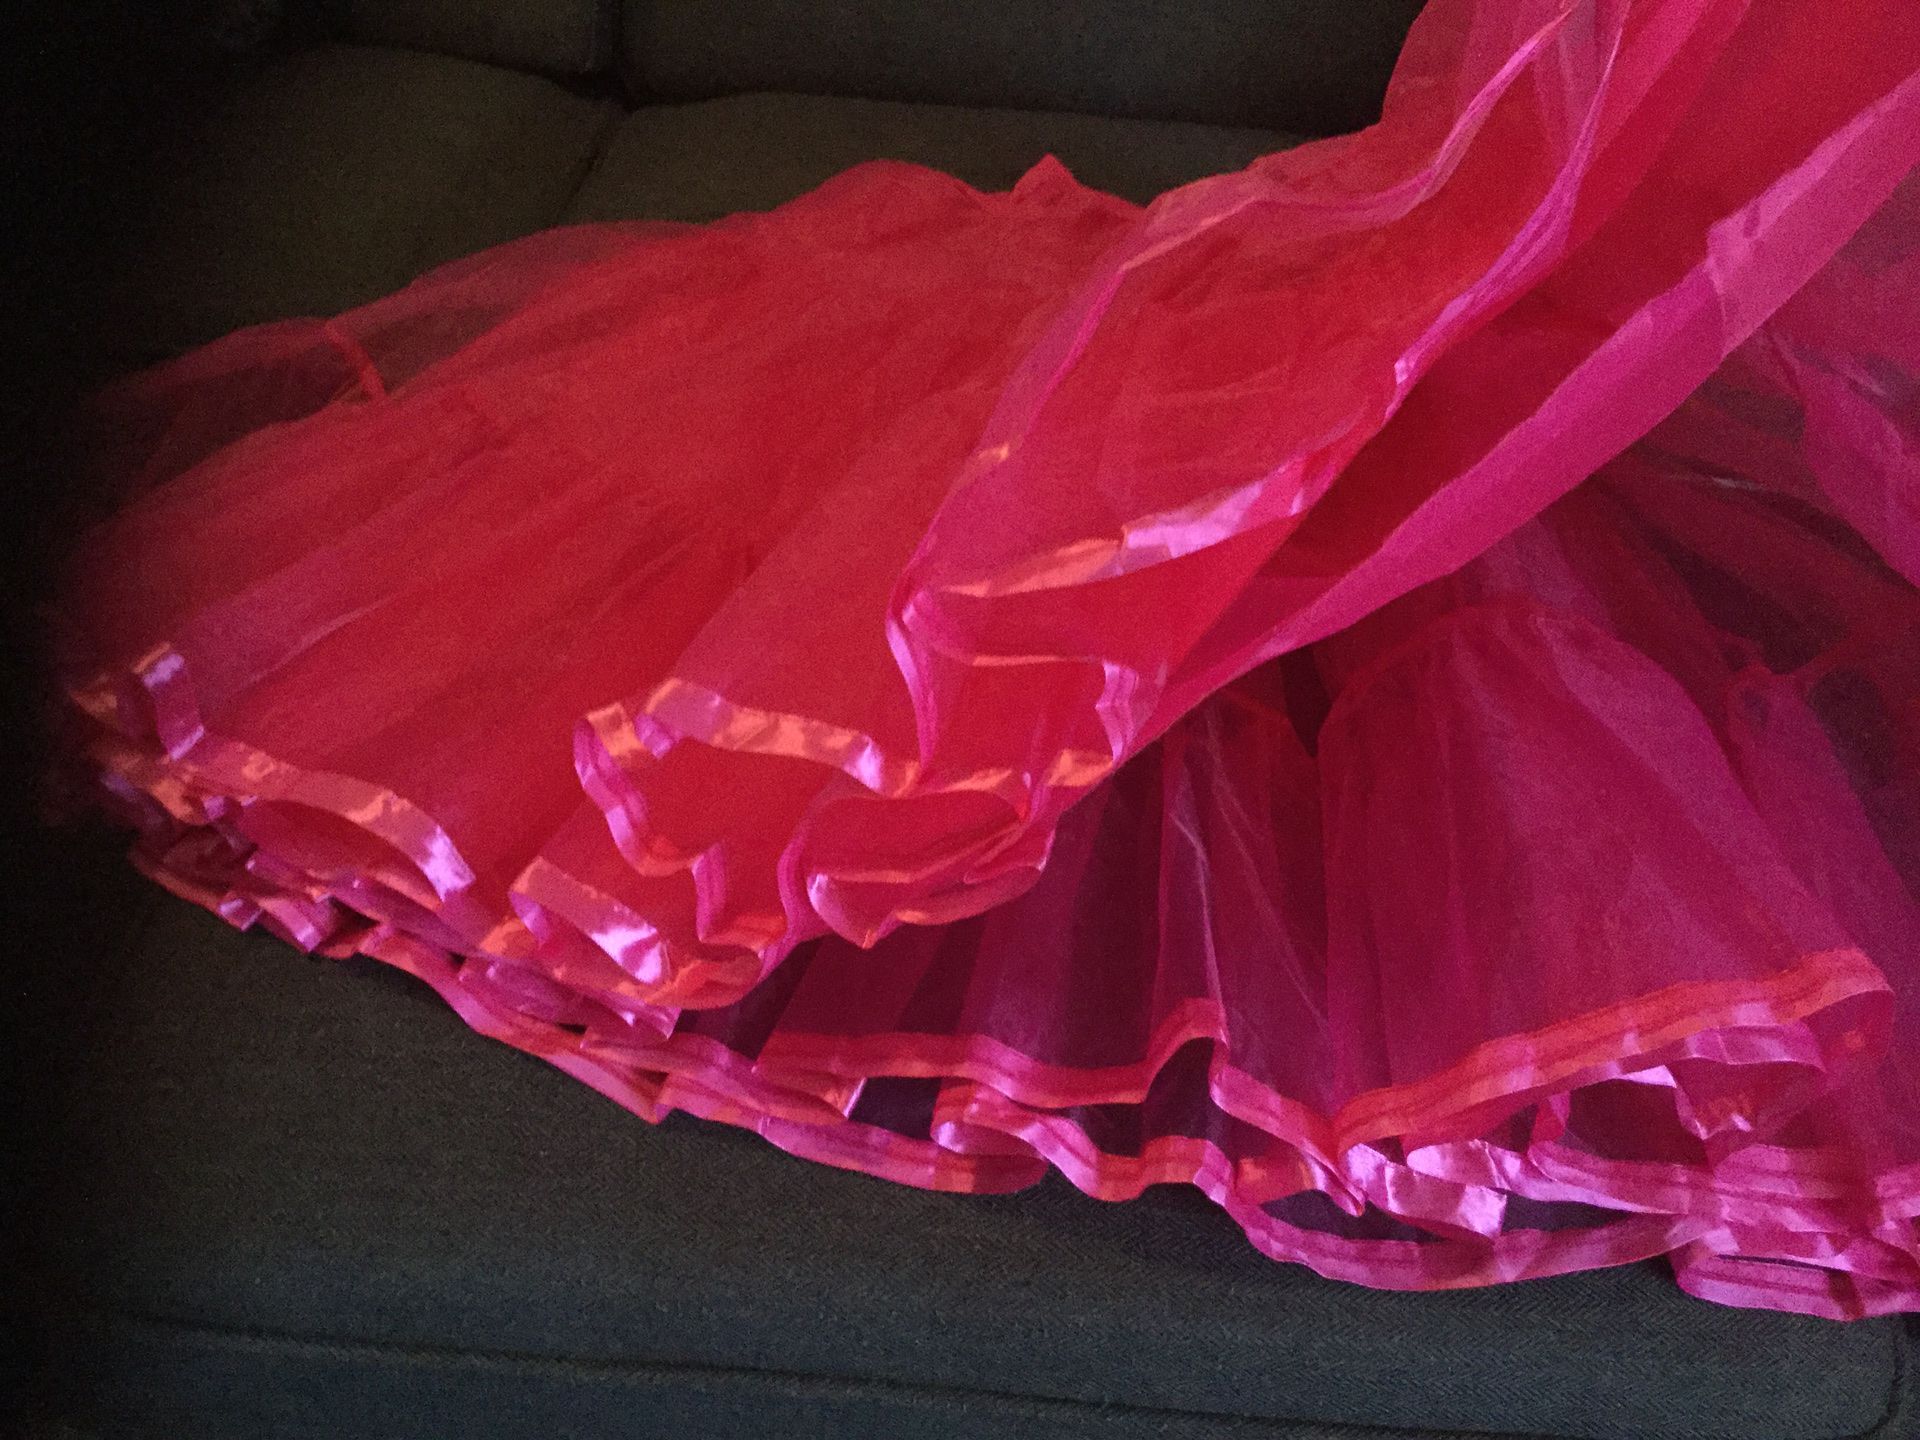 It’s a tutu dress skirt never wear size /small /medium /large it can be even extra small